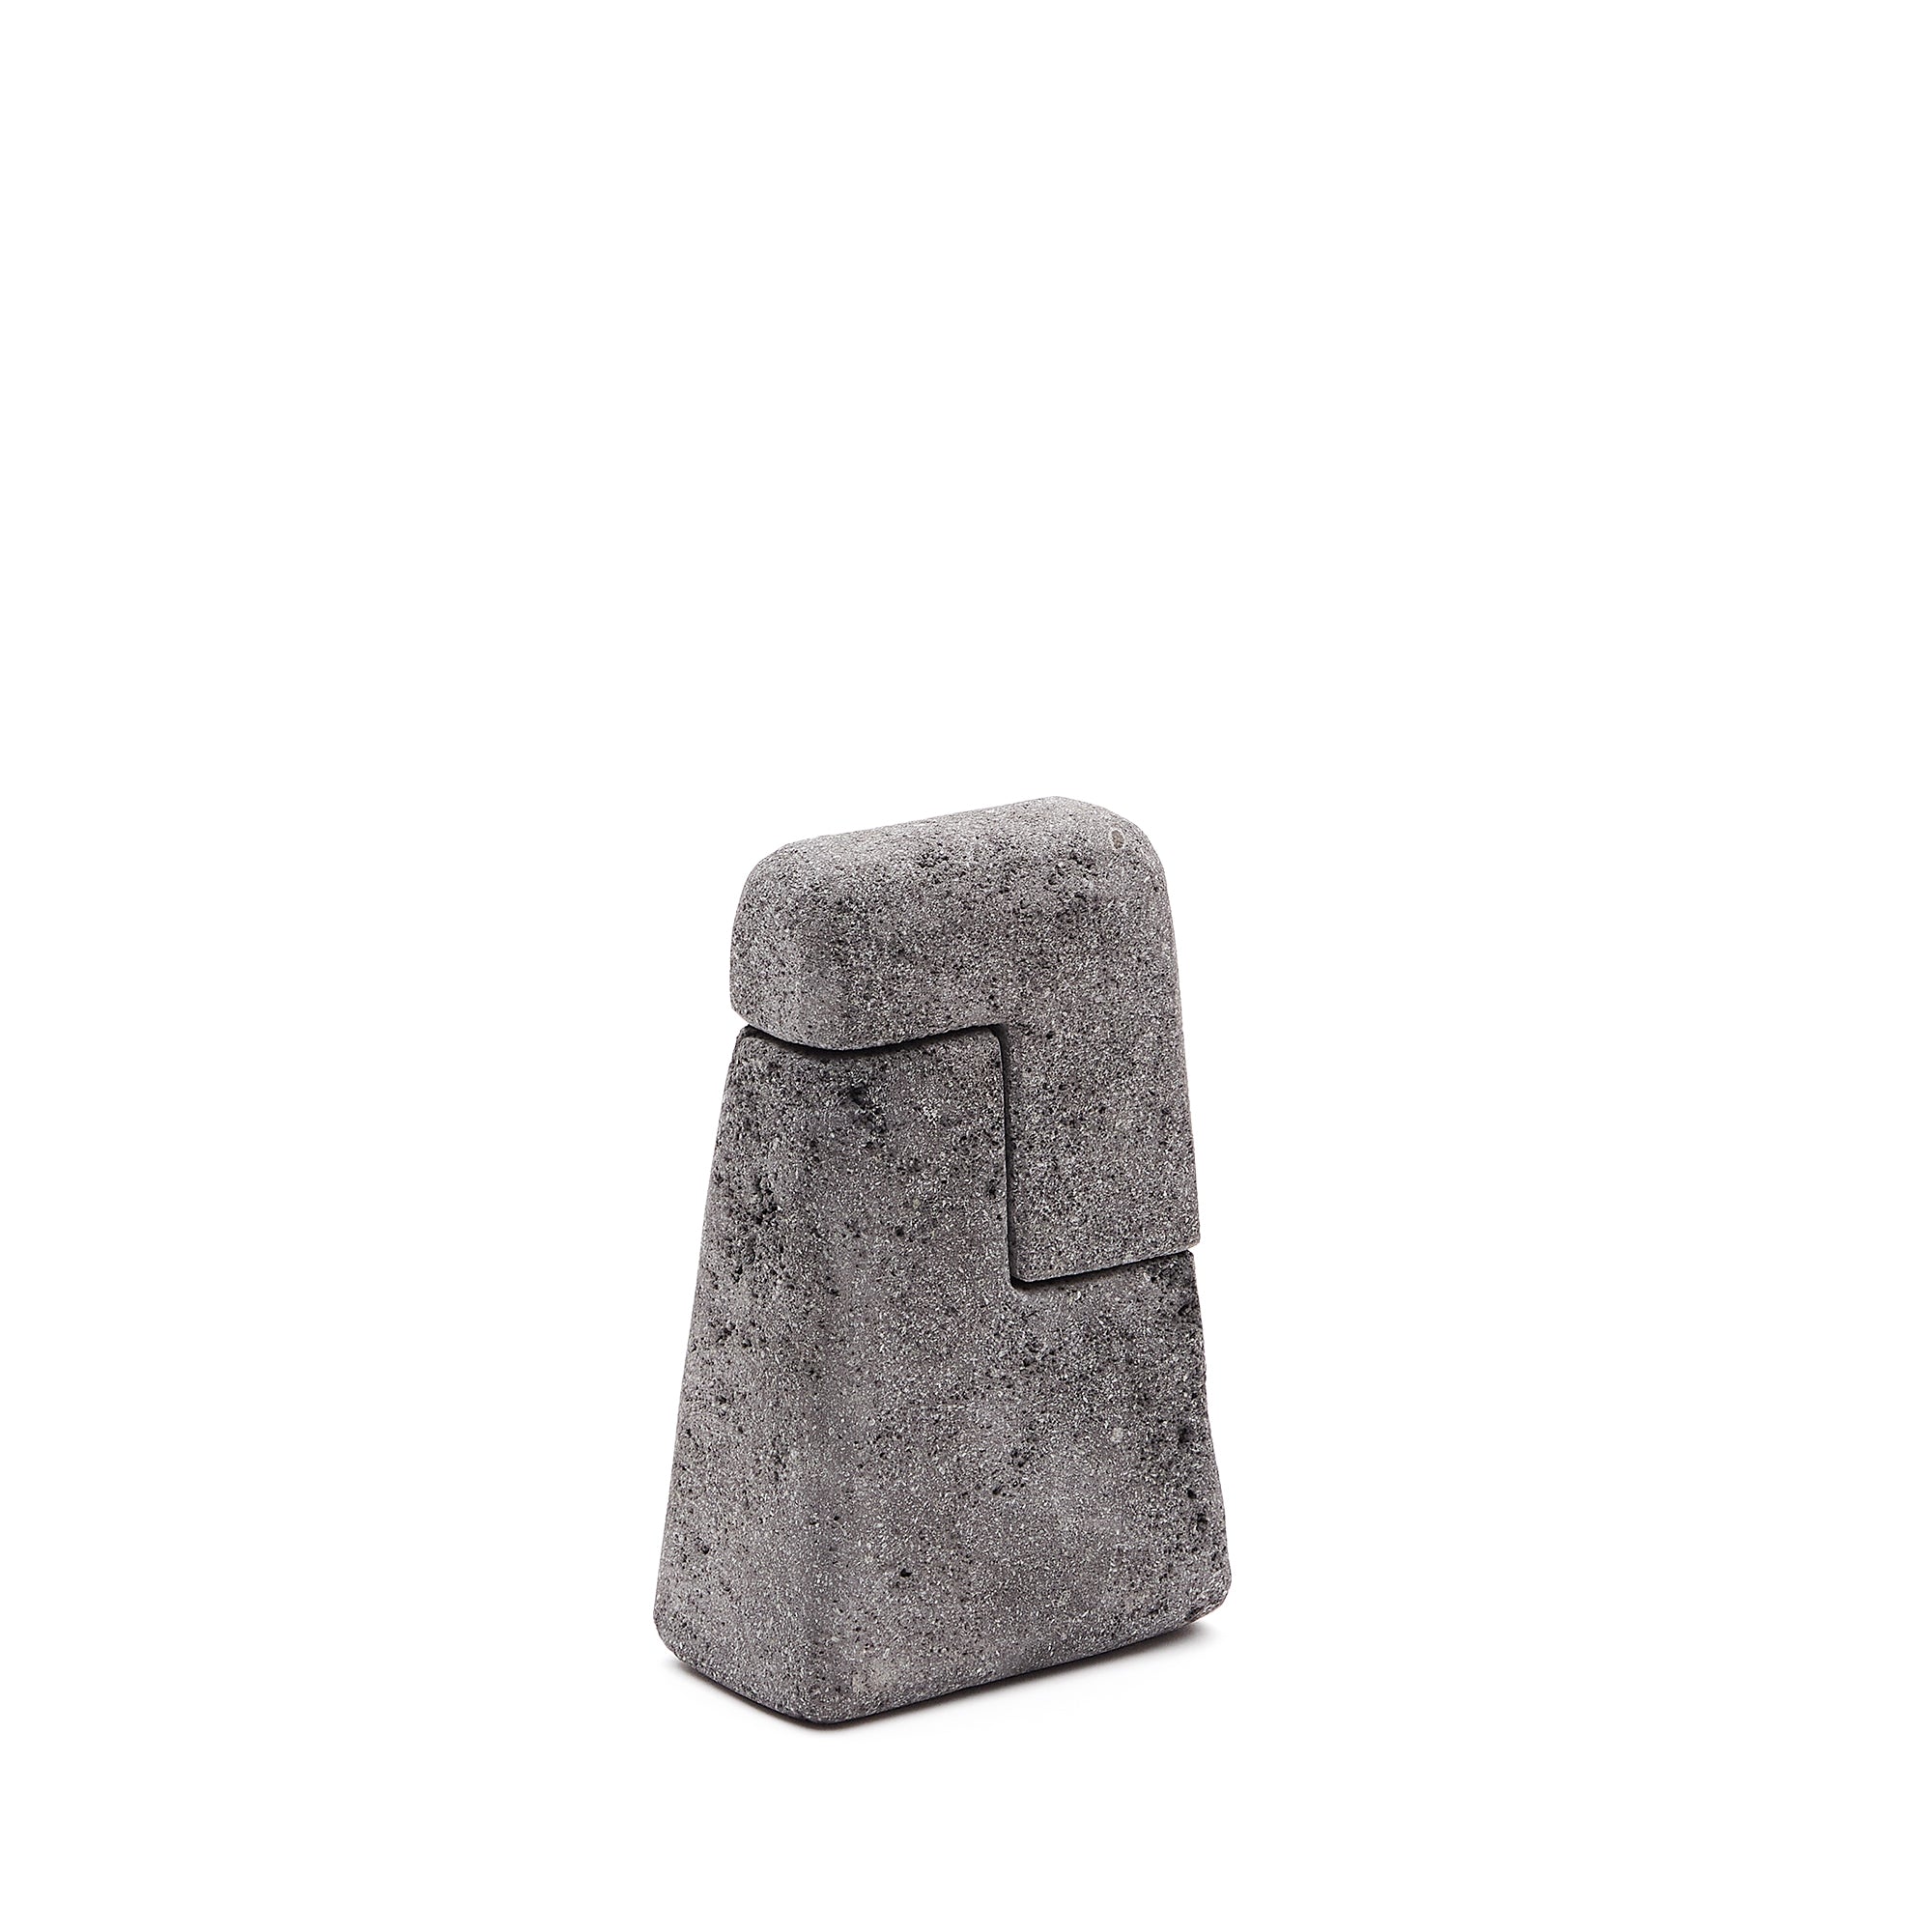 Sipa stone statue with natural finish 20 cm